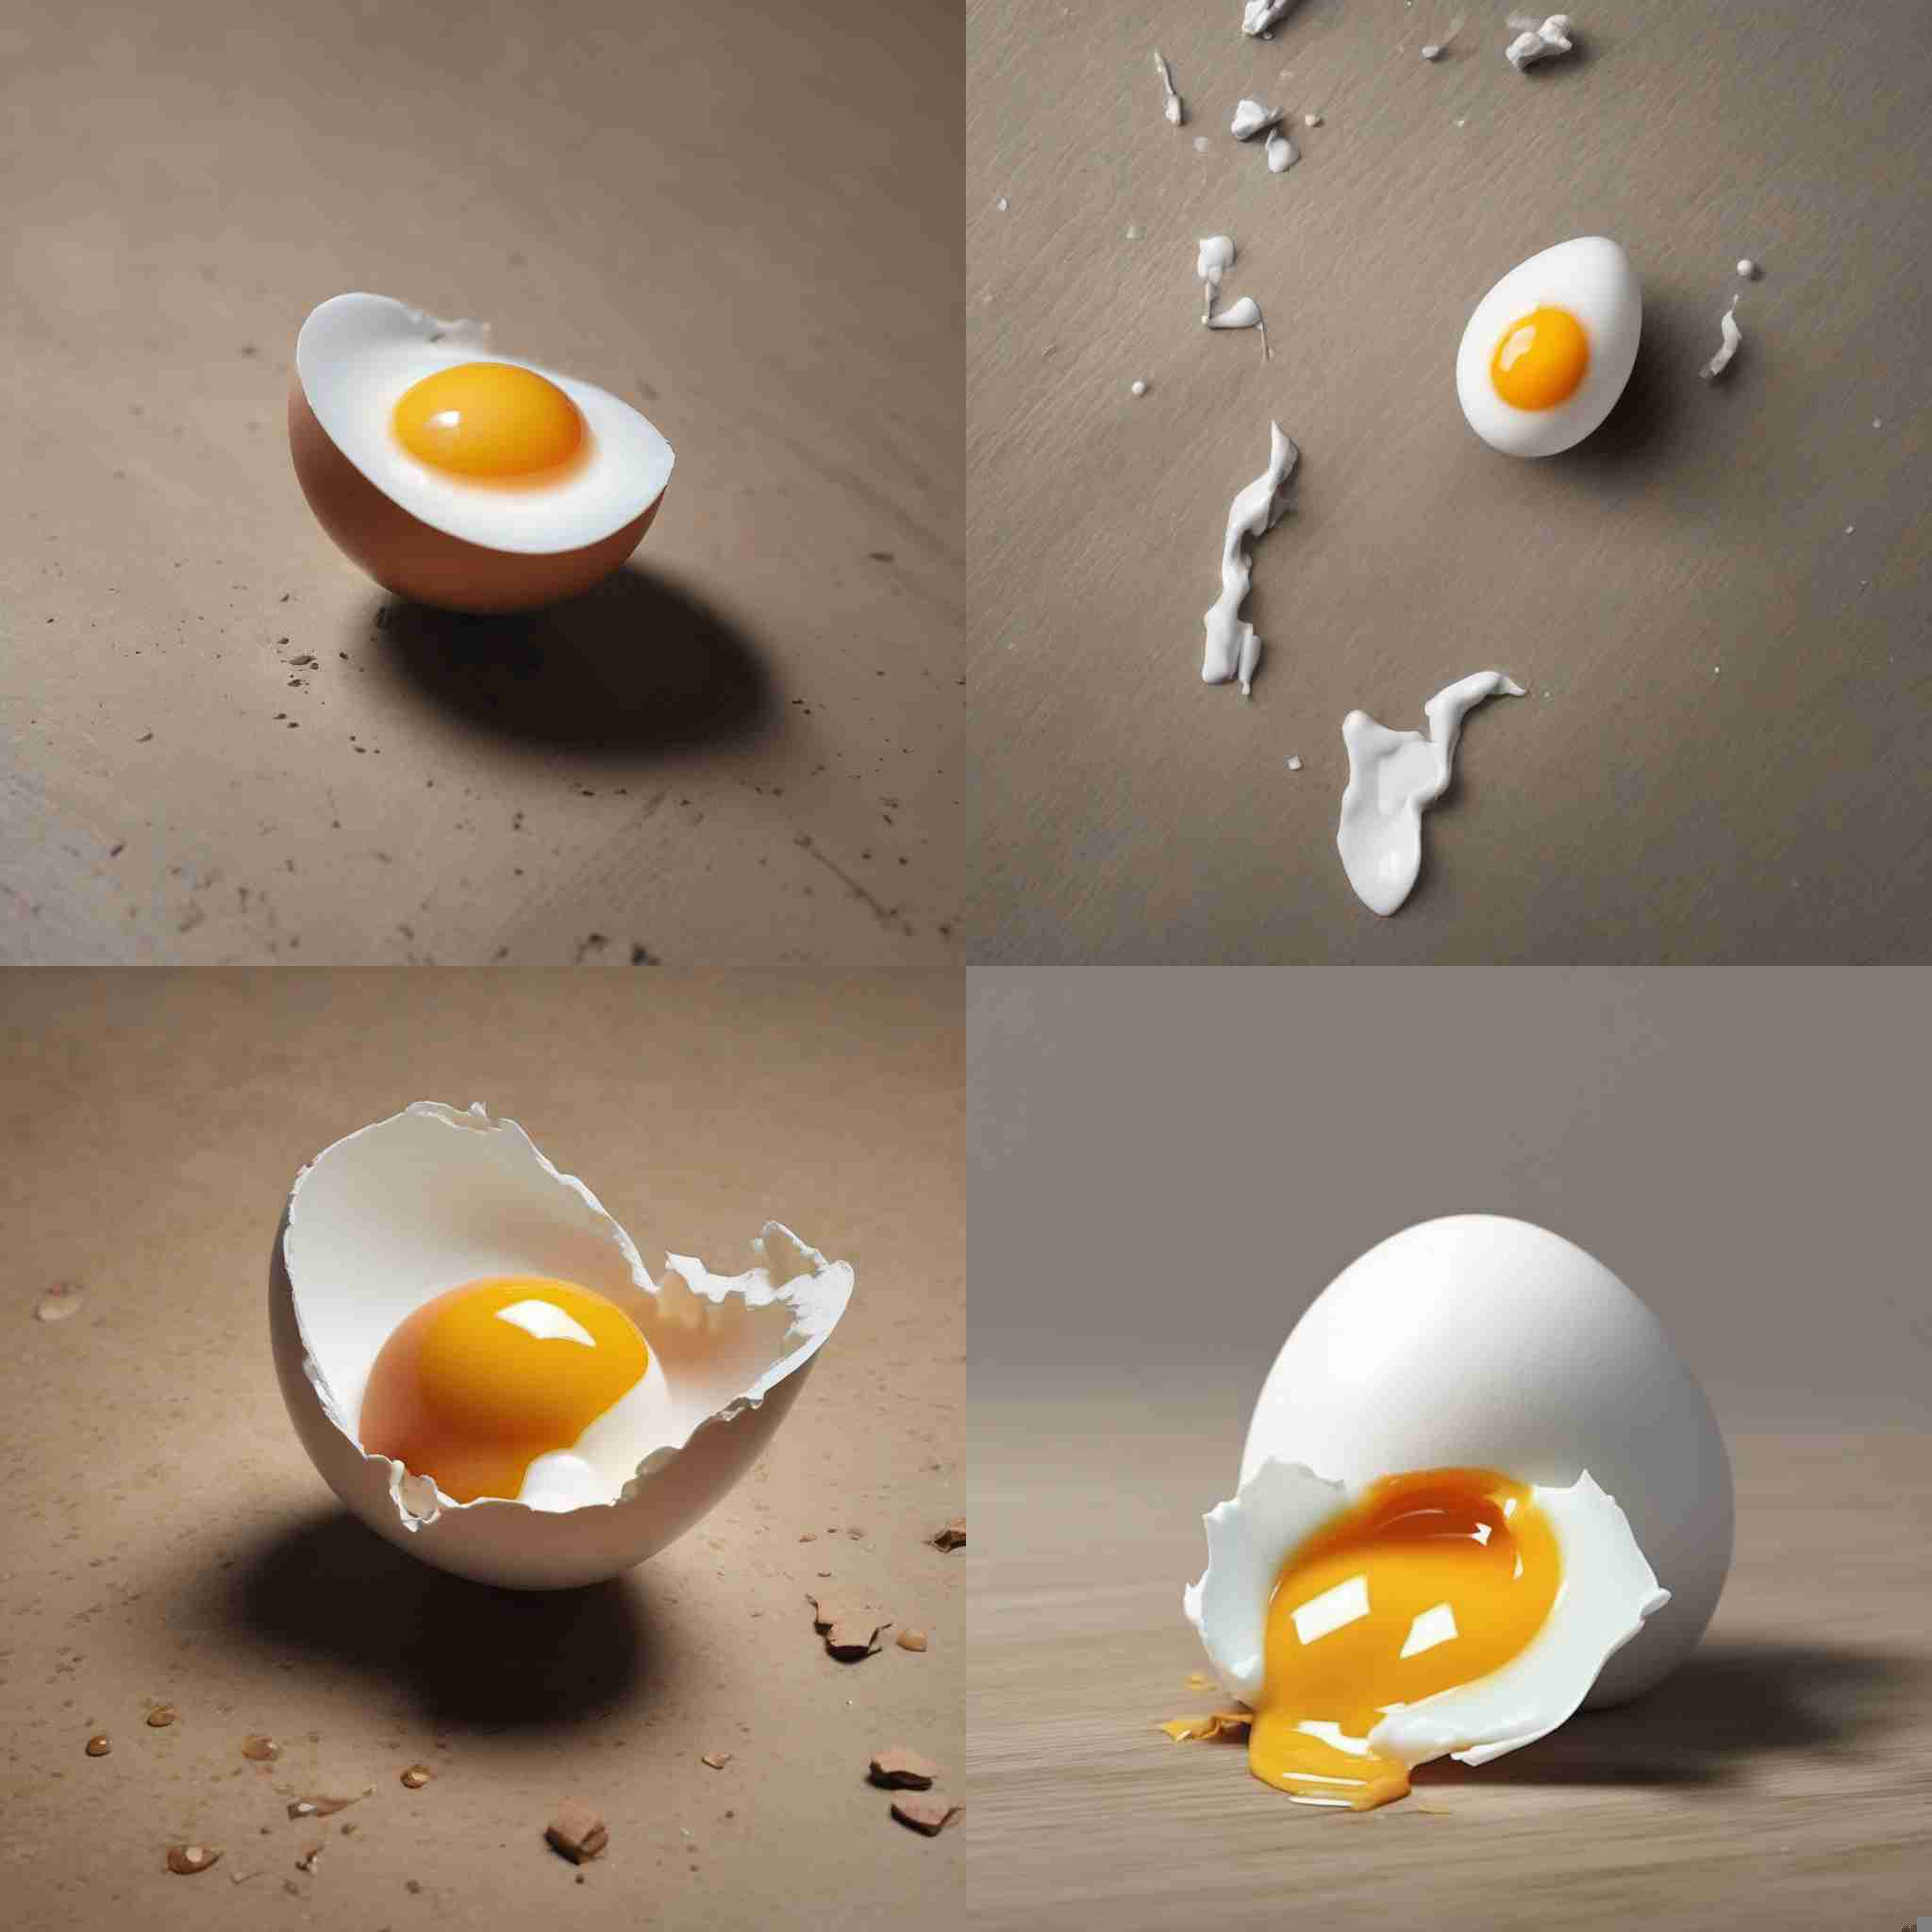 An egg dropped on the floor